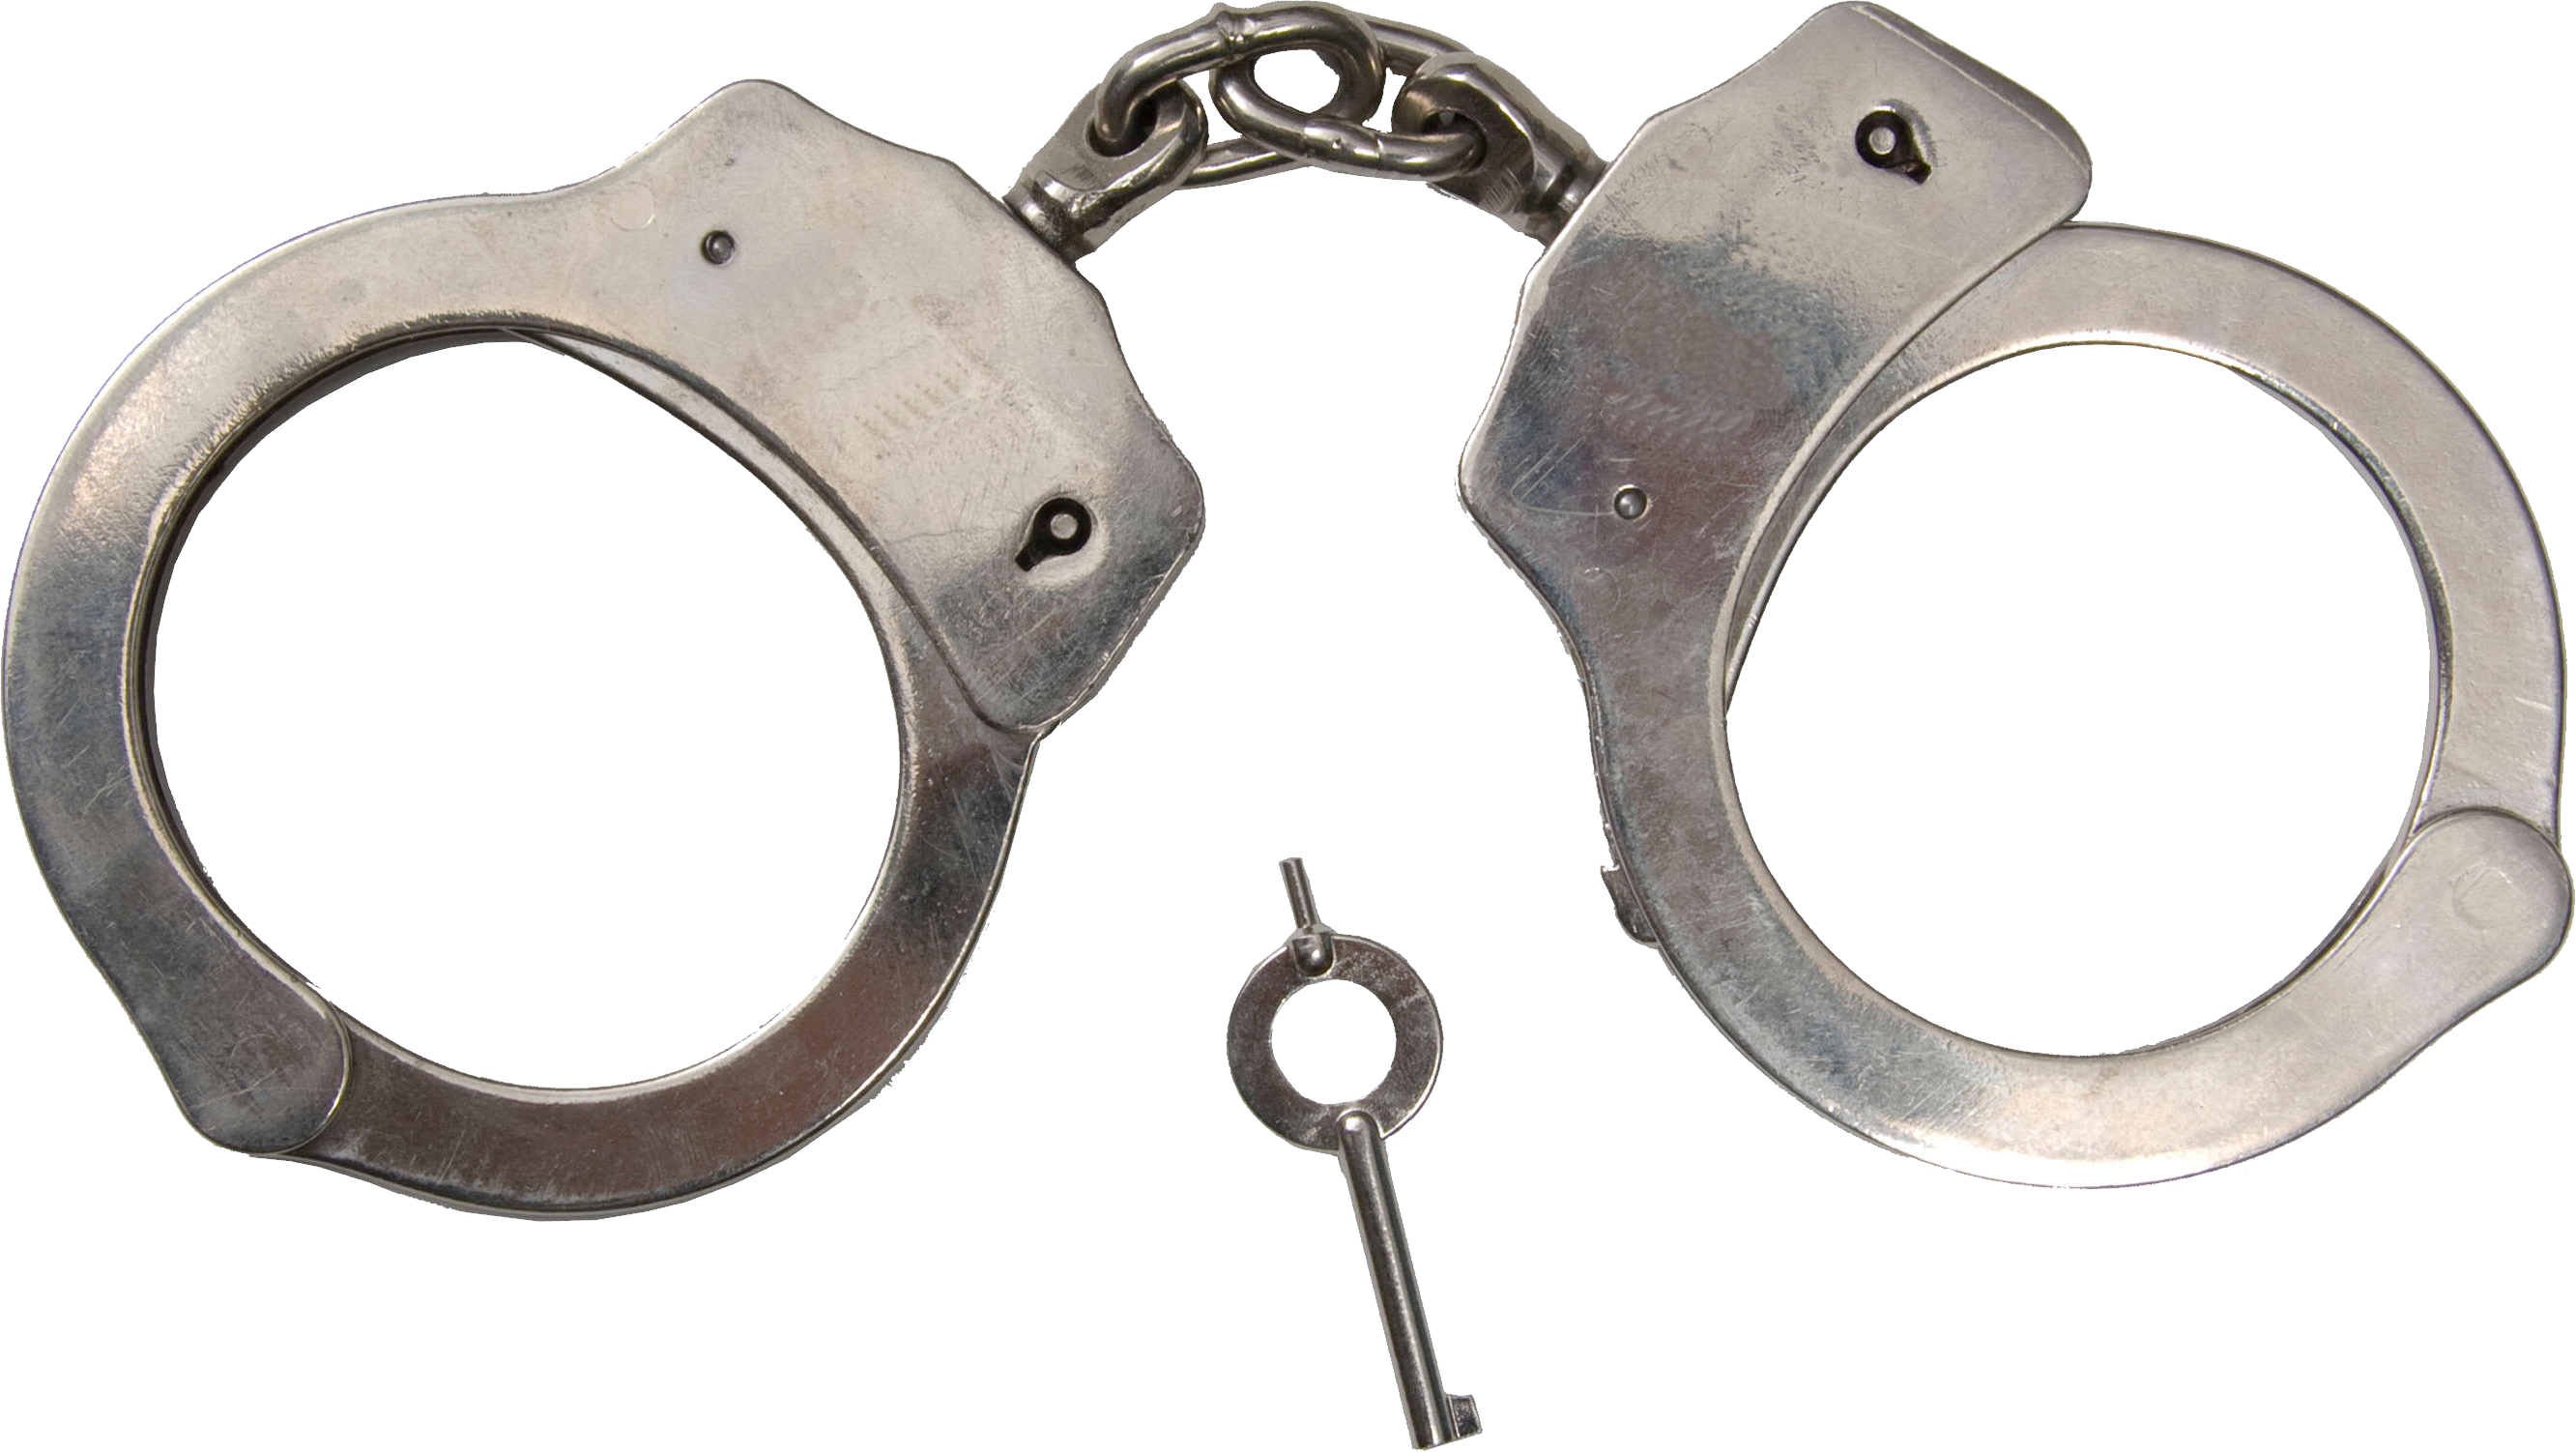 Classic Metal HandCuffs PNG Image.